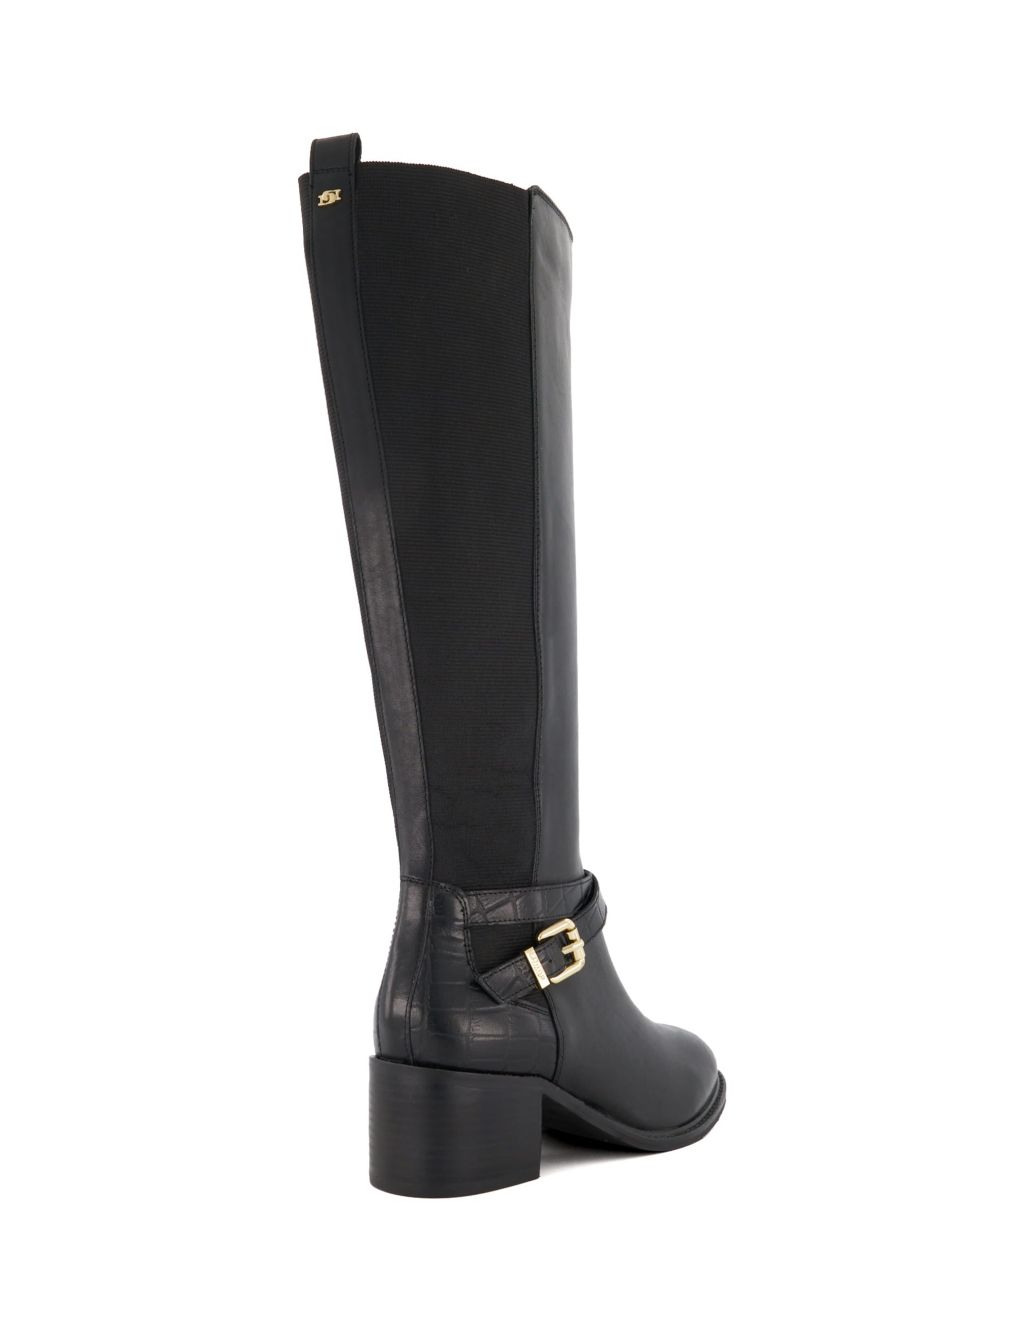 Wide Fit Leather Block Heel Knee High Boots | Dune London | M&S